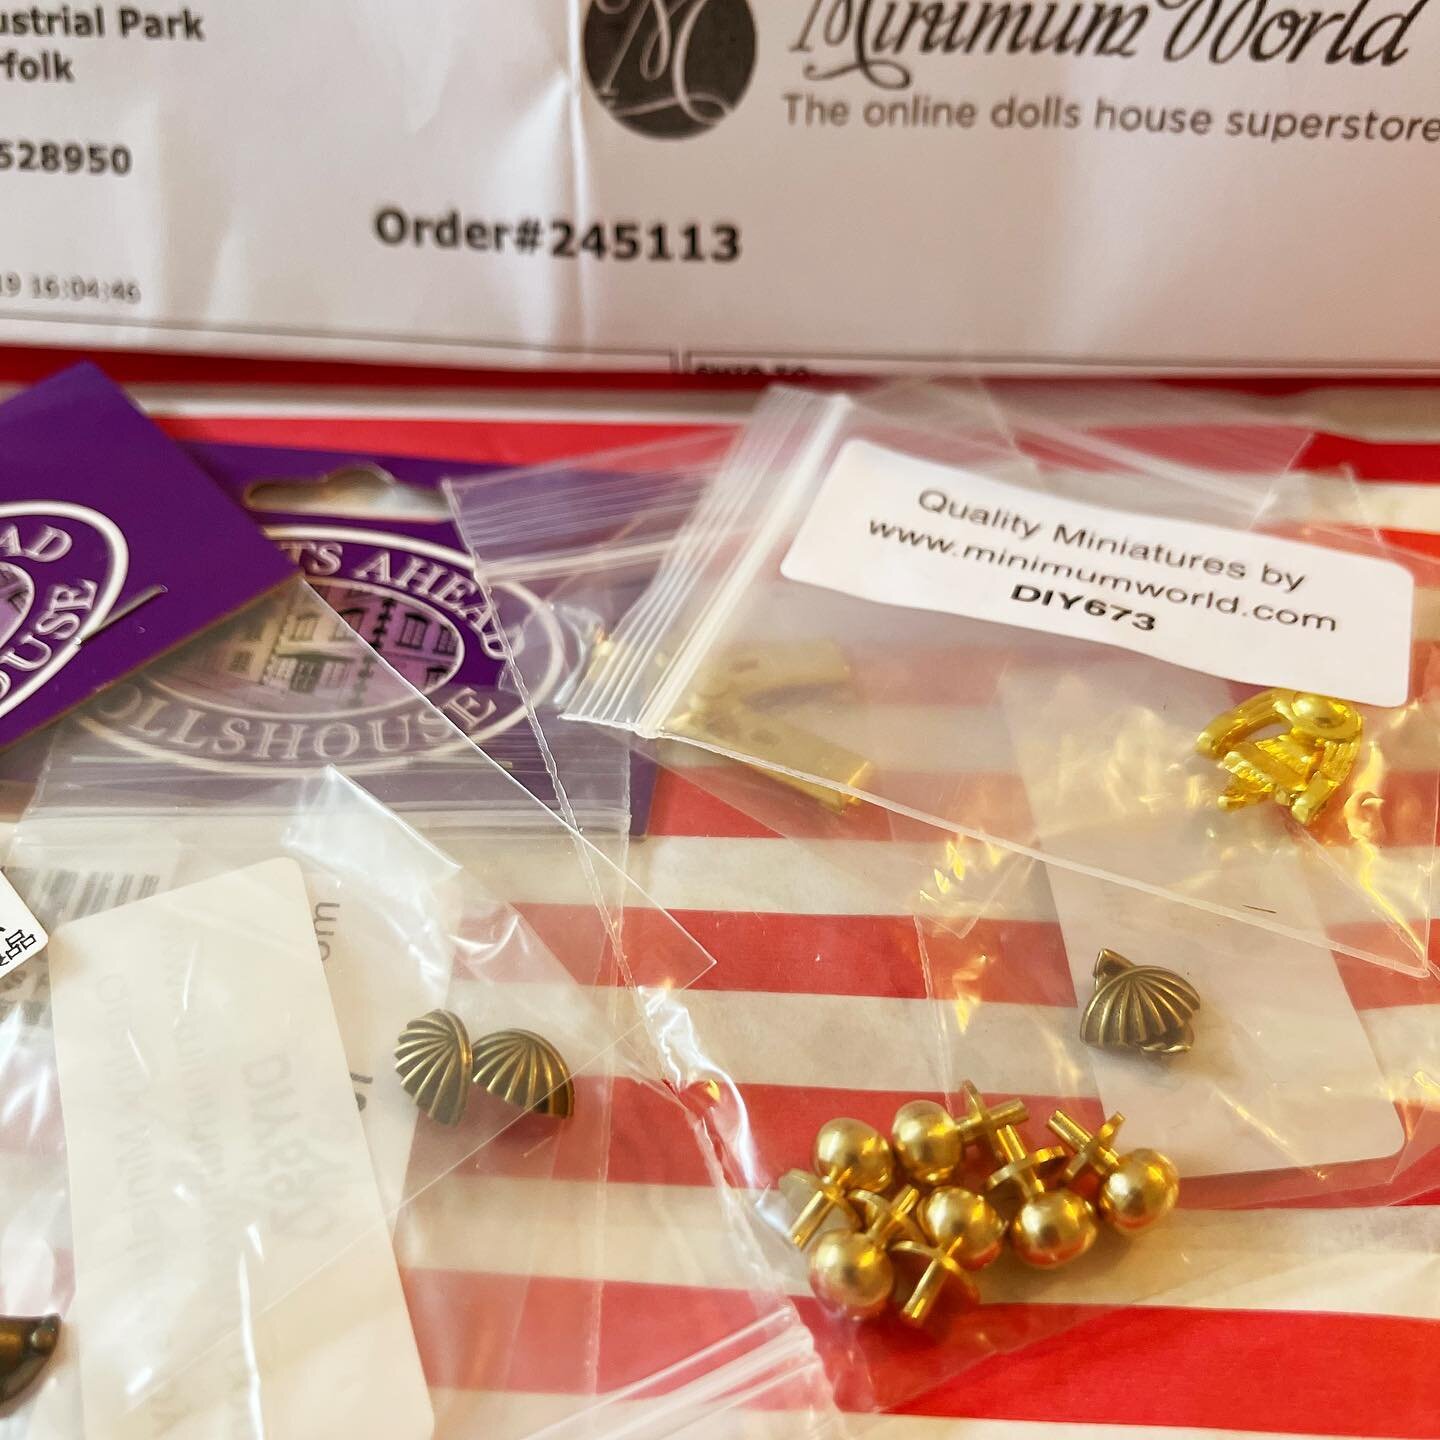 Just received my order of knobs and knockers 🤦&zwj;♀️🤣 from @minimum_world_miniatures 🤩 what could we possibly be making next then?!?! 🤔🤔🤔😉🤓🤓🤓
.
.
.
.
.
.

#diyminiatureprojects #dollhouseminiatures #dollshouse #miniature #miniatura #dailym